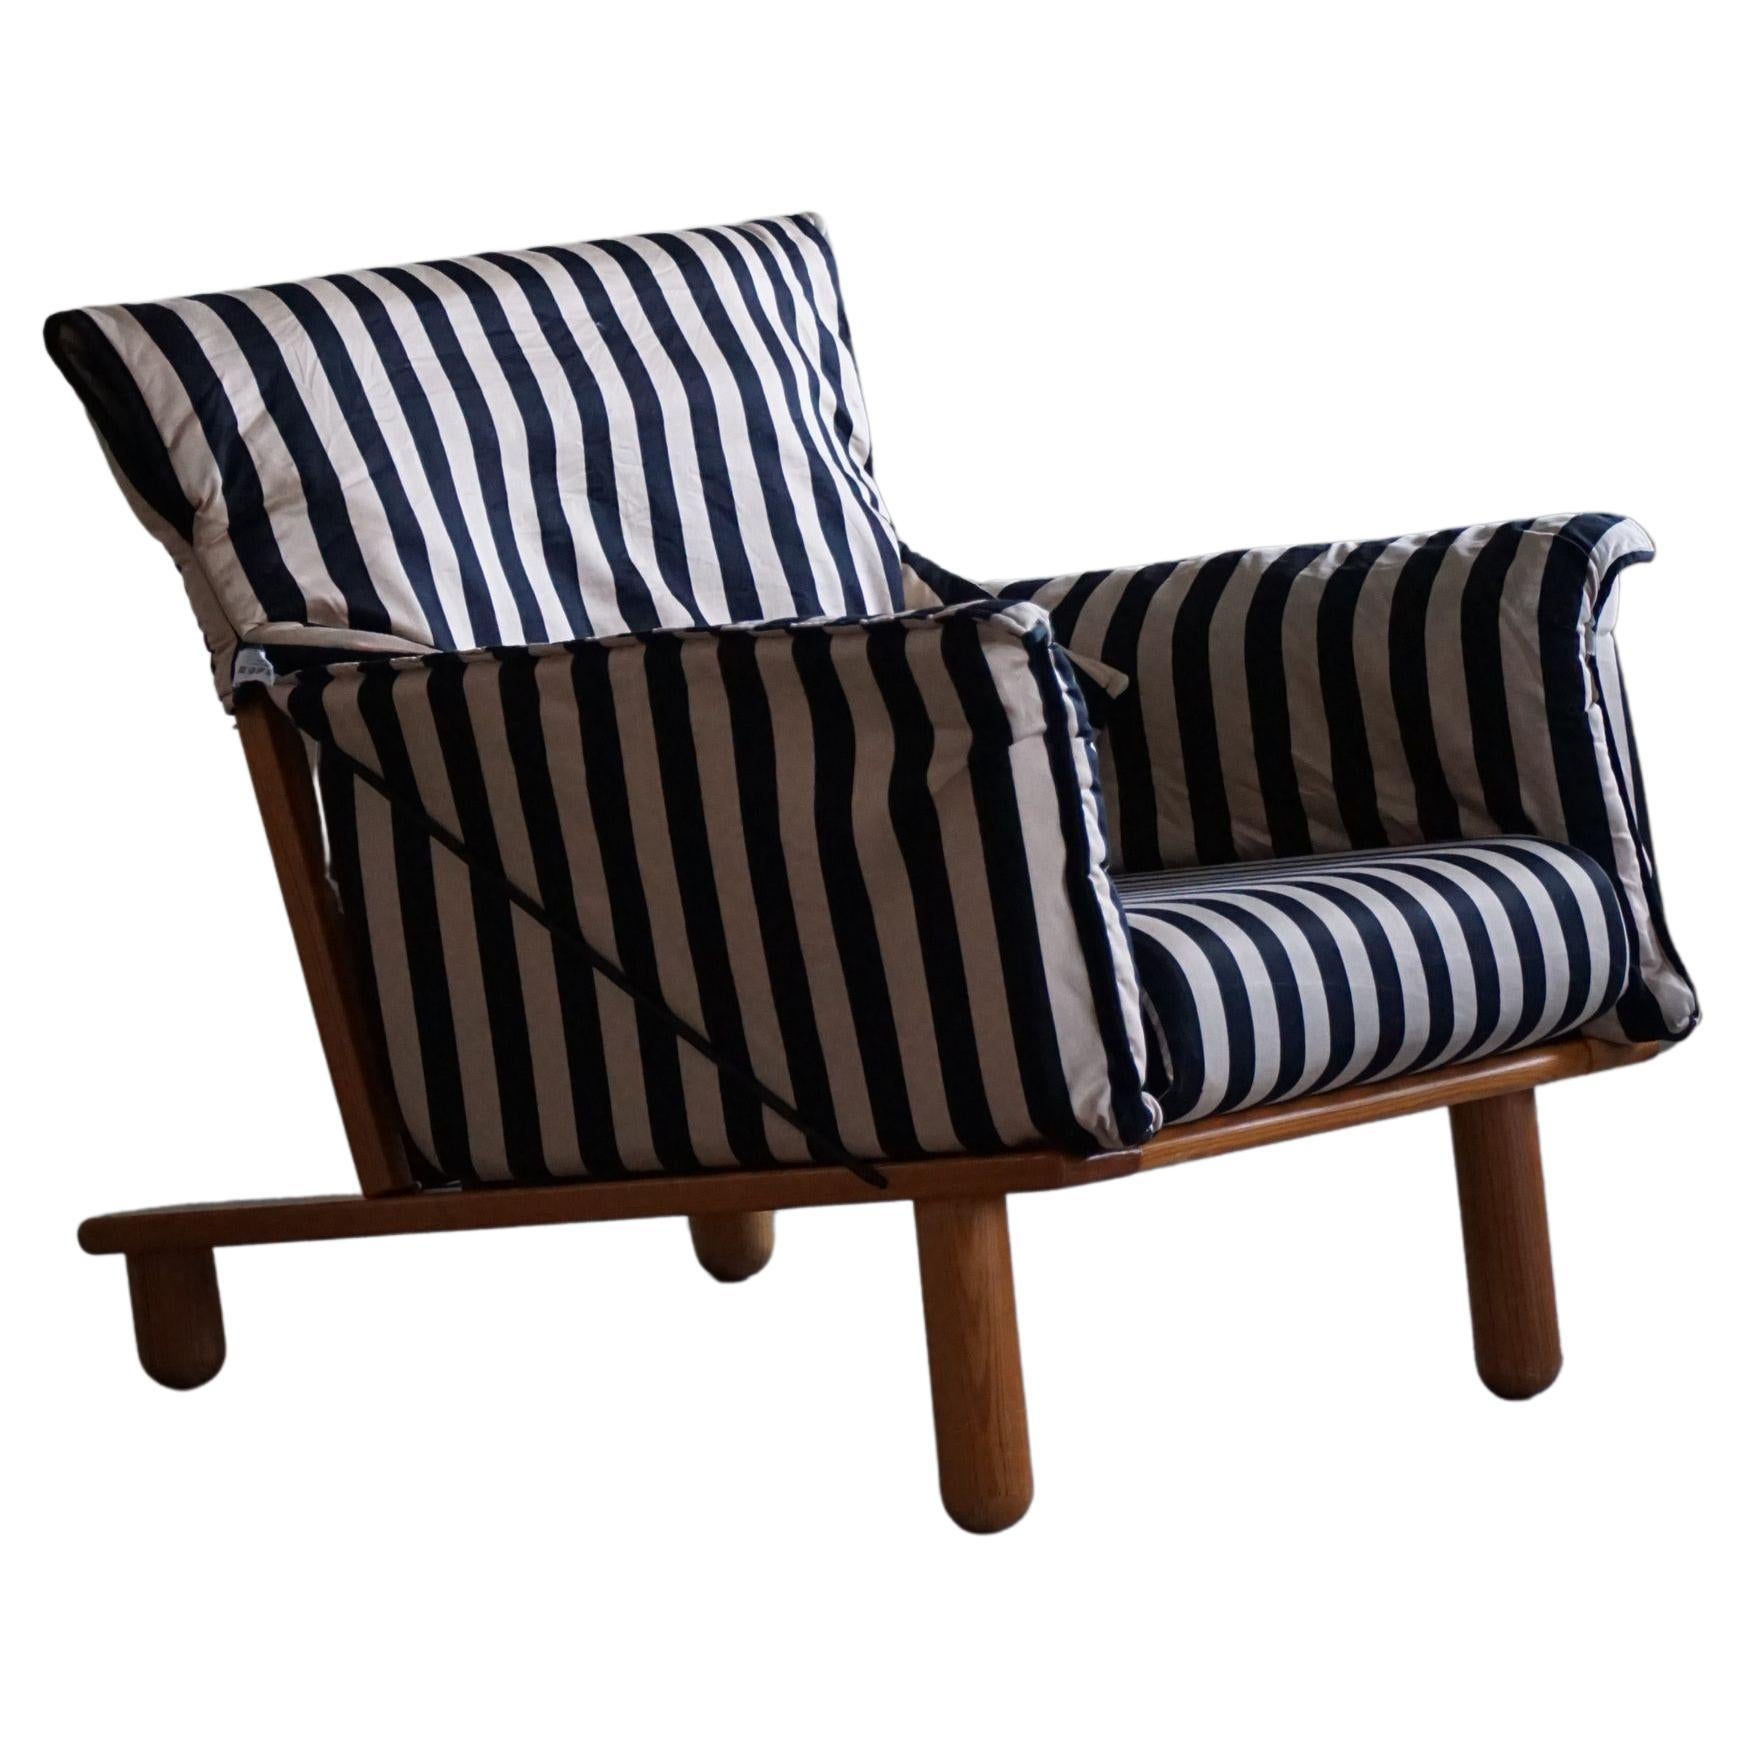 Tord Björklund, Lounge Chair in Fabric & Pine, Model "Gotland" for IKEA, 1980s For Sale